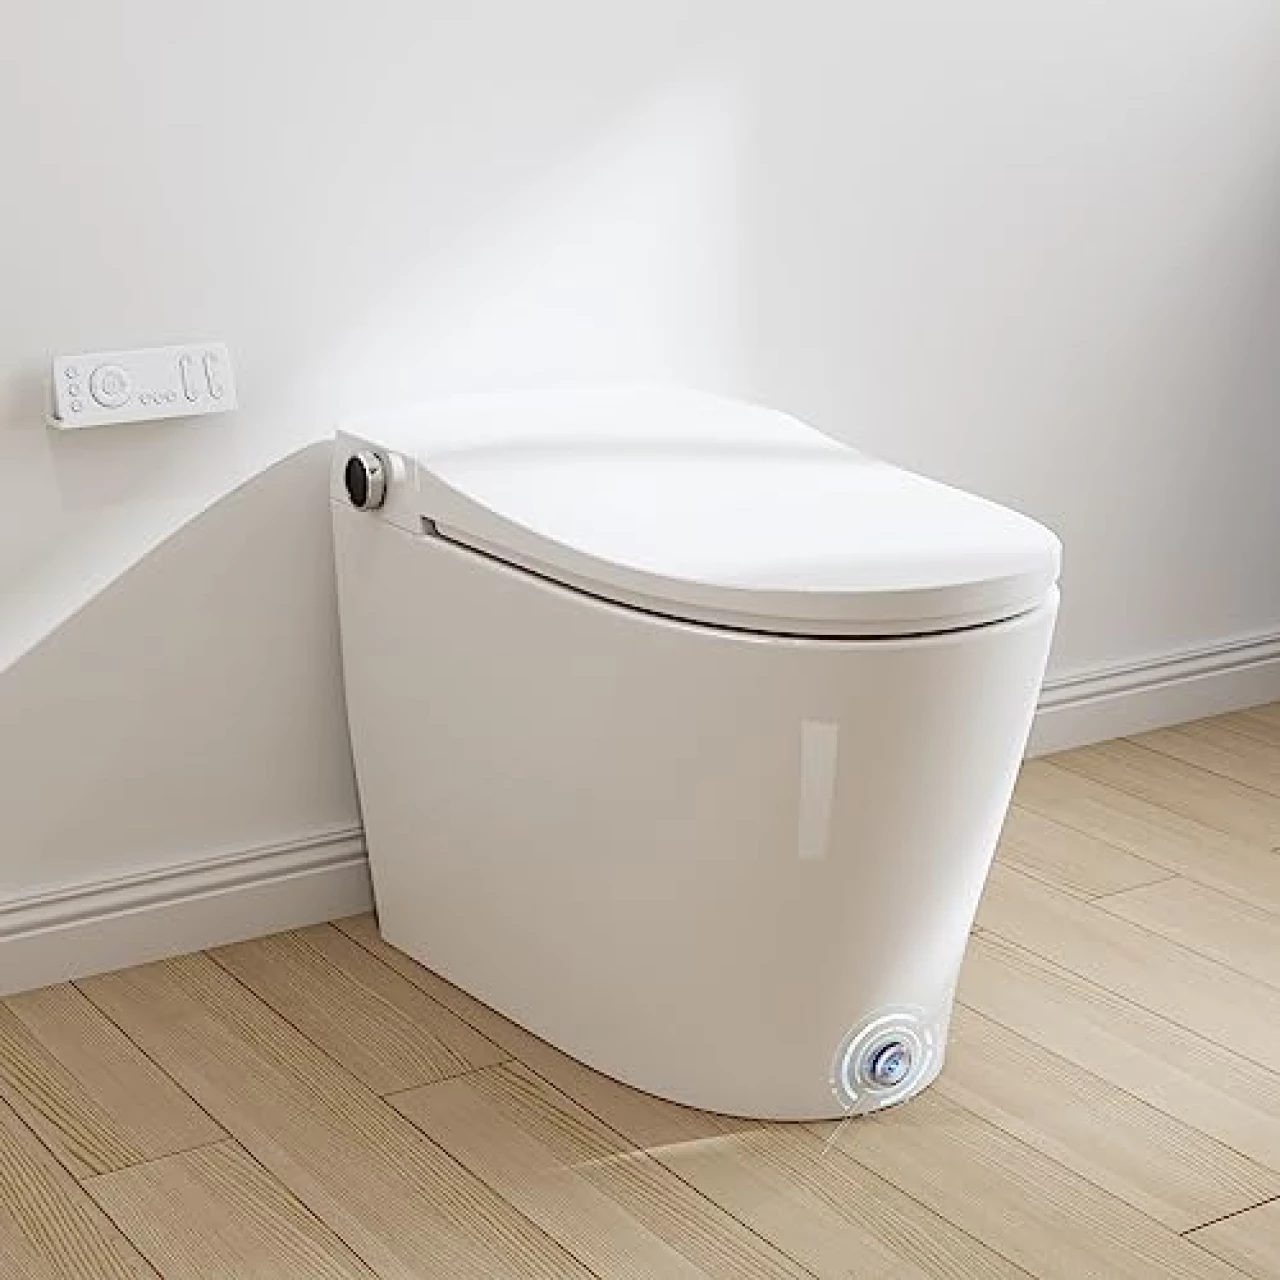 HOROW Luxury Smart Toilet, Upgraded and Modern with Bidet Built-in, Tankless Toilet with Automatic Powerful Flush, Auto Open/close Lid, Heated Bidet Seat, Instant Warm Water